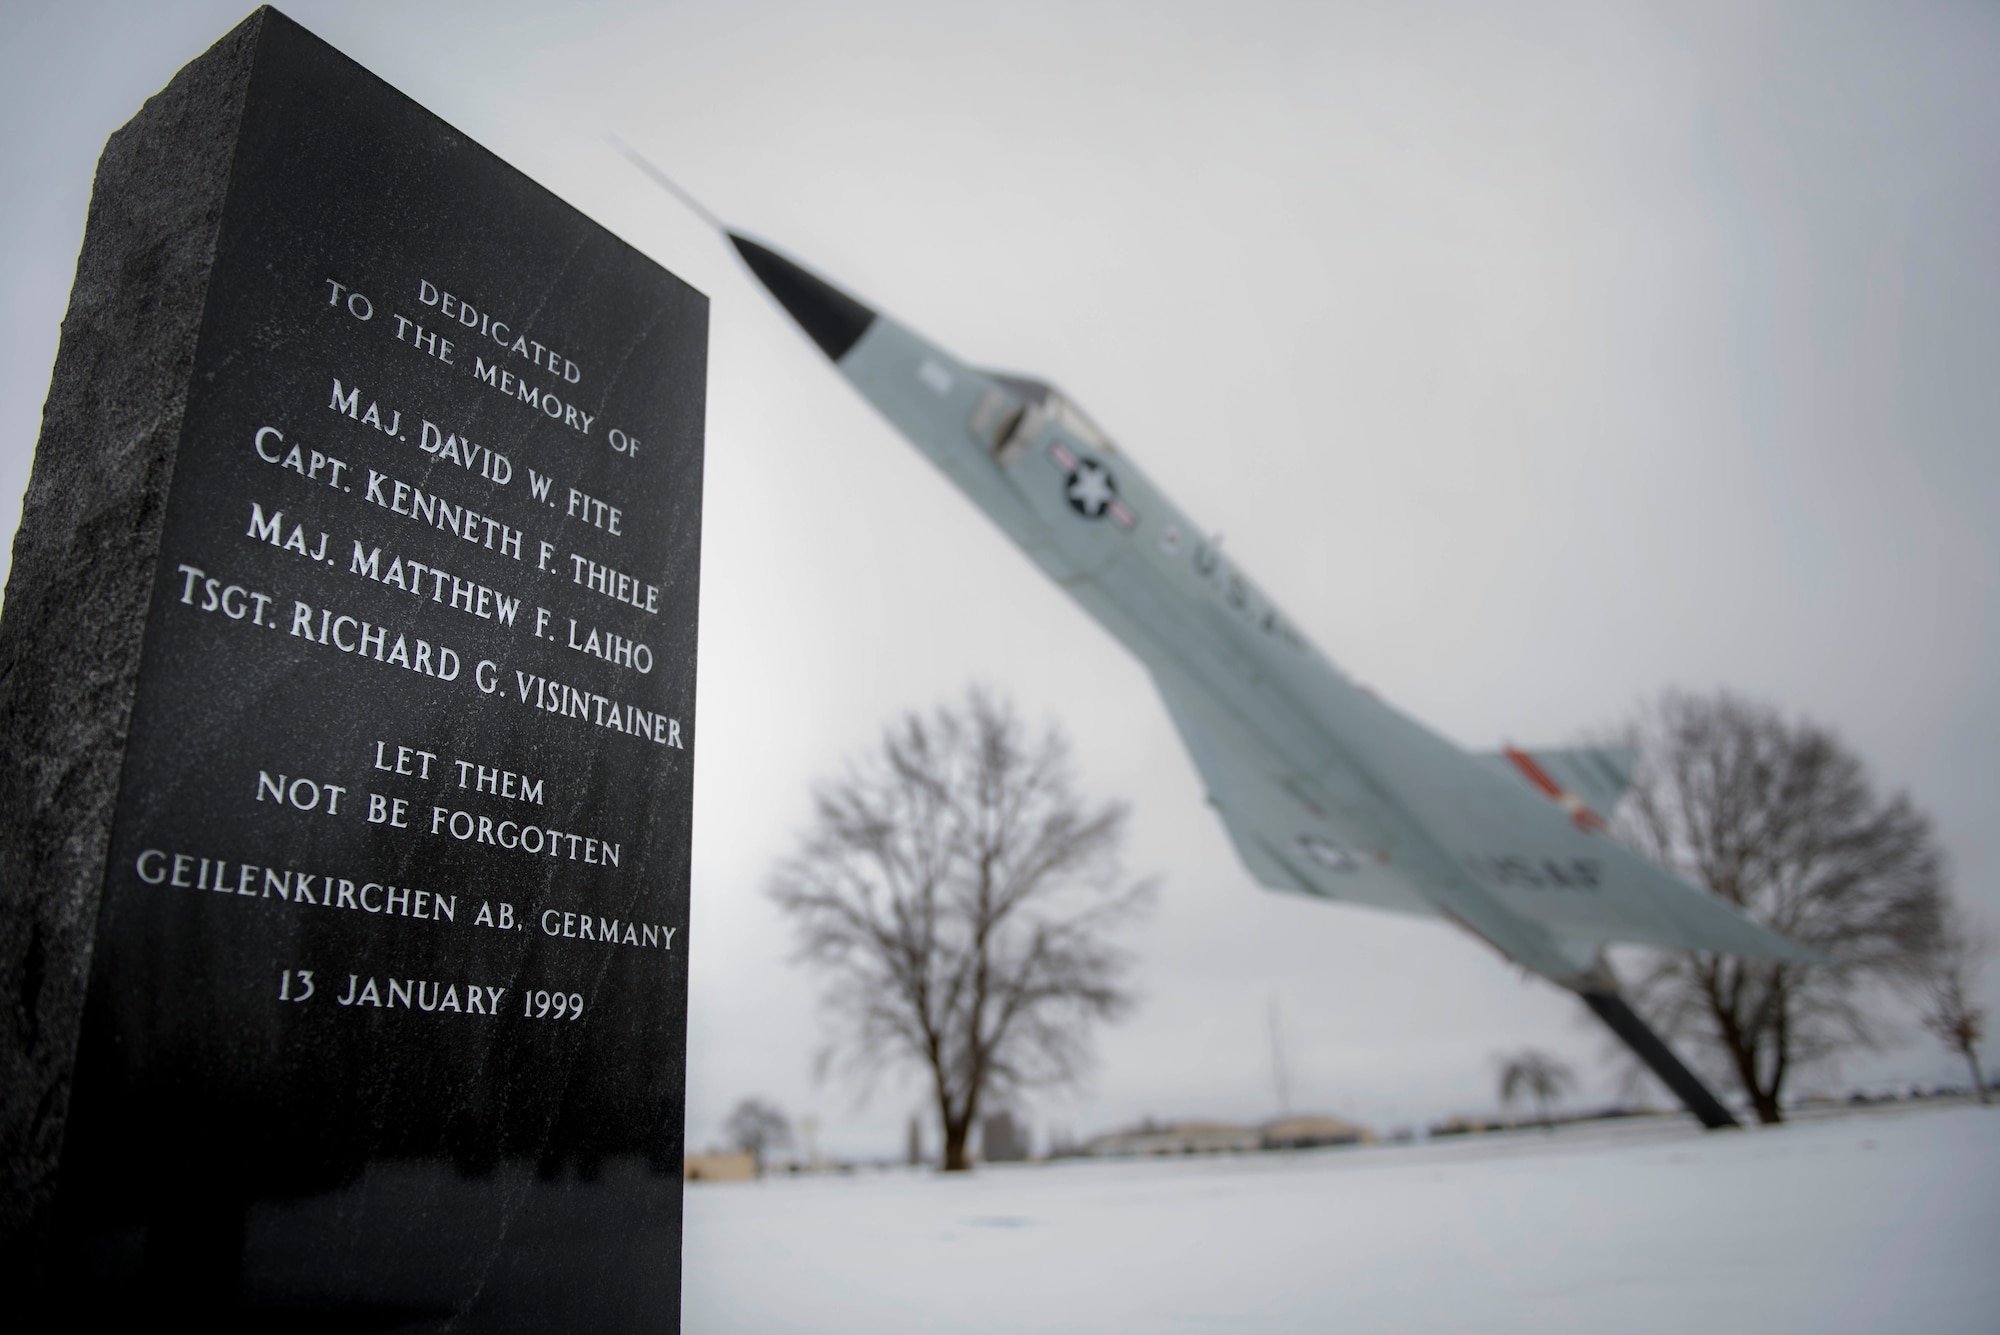 A memorial at Fairchild Air Force Base, Wash. honors the crew of a KC-135 Stratotanker crash that took place near Geilenkirchen Air Base, Germany. The memorial was erected for "ESSO 77" crew members: Maj. David Fite, Maj. Matthew Laiho, Capt. Kenneth Thiele and Tech. Sgt. Richard Visintainer who perished in the crash Jan. 13, 1999.(U.S. Air National Guard photo by Master Sgt. Michael Stewart)